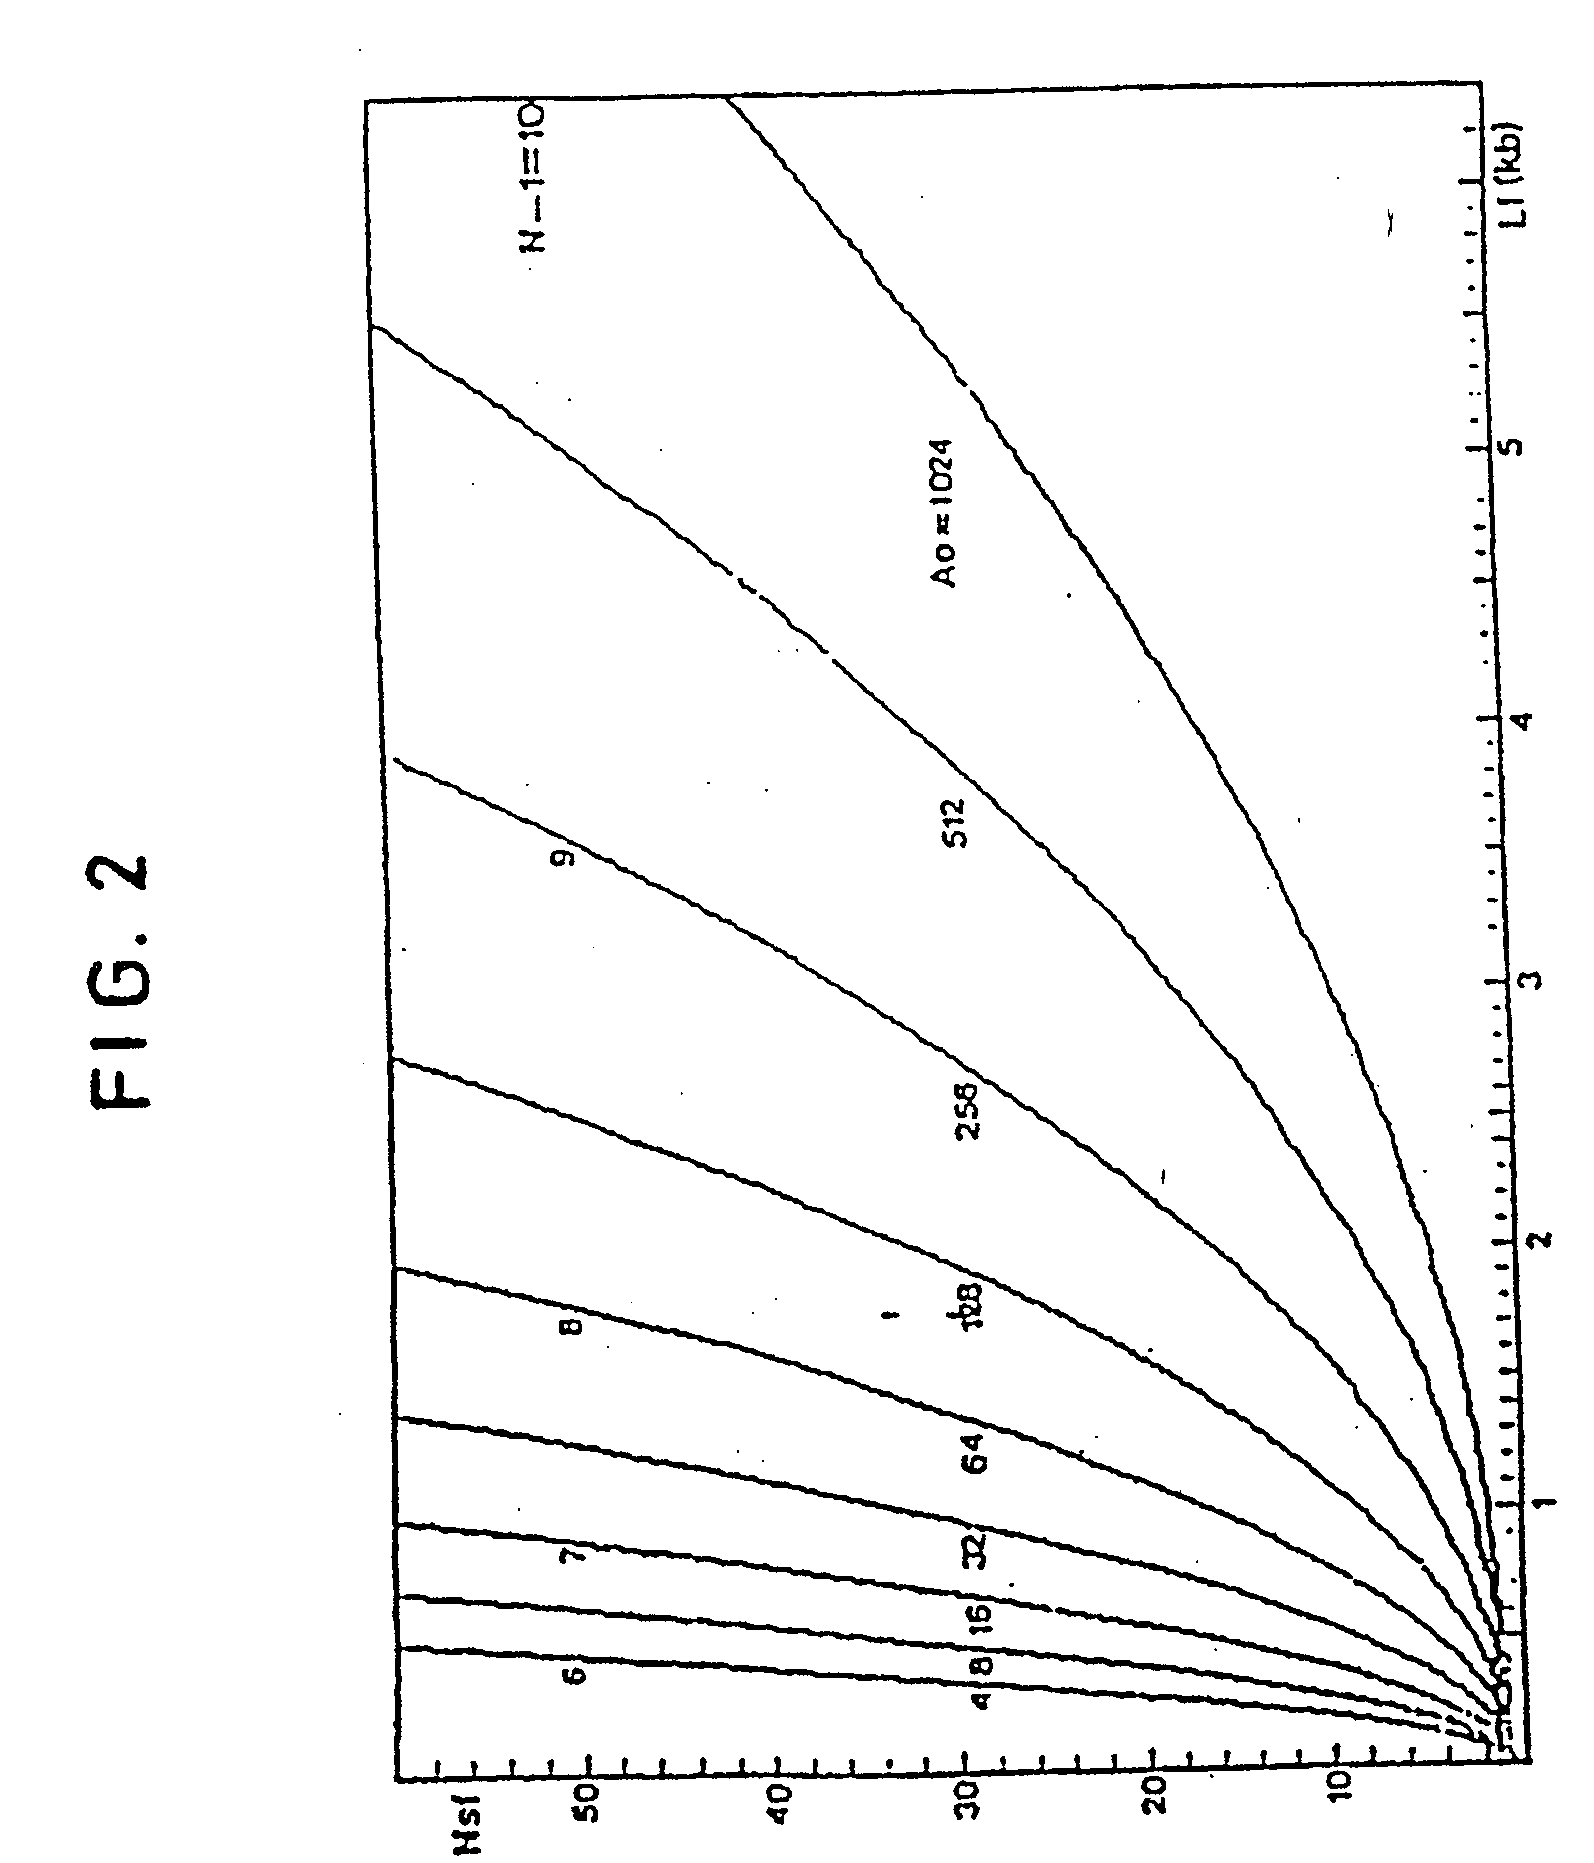 Method of sequencing by hybridization of oligonucleotide probes